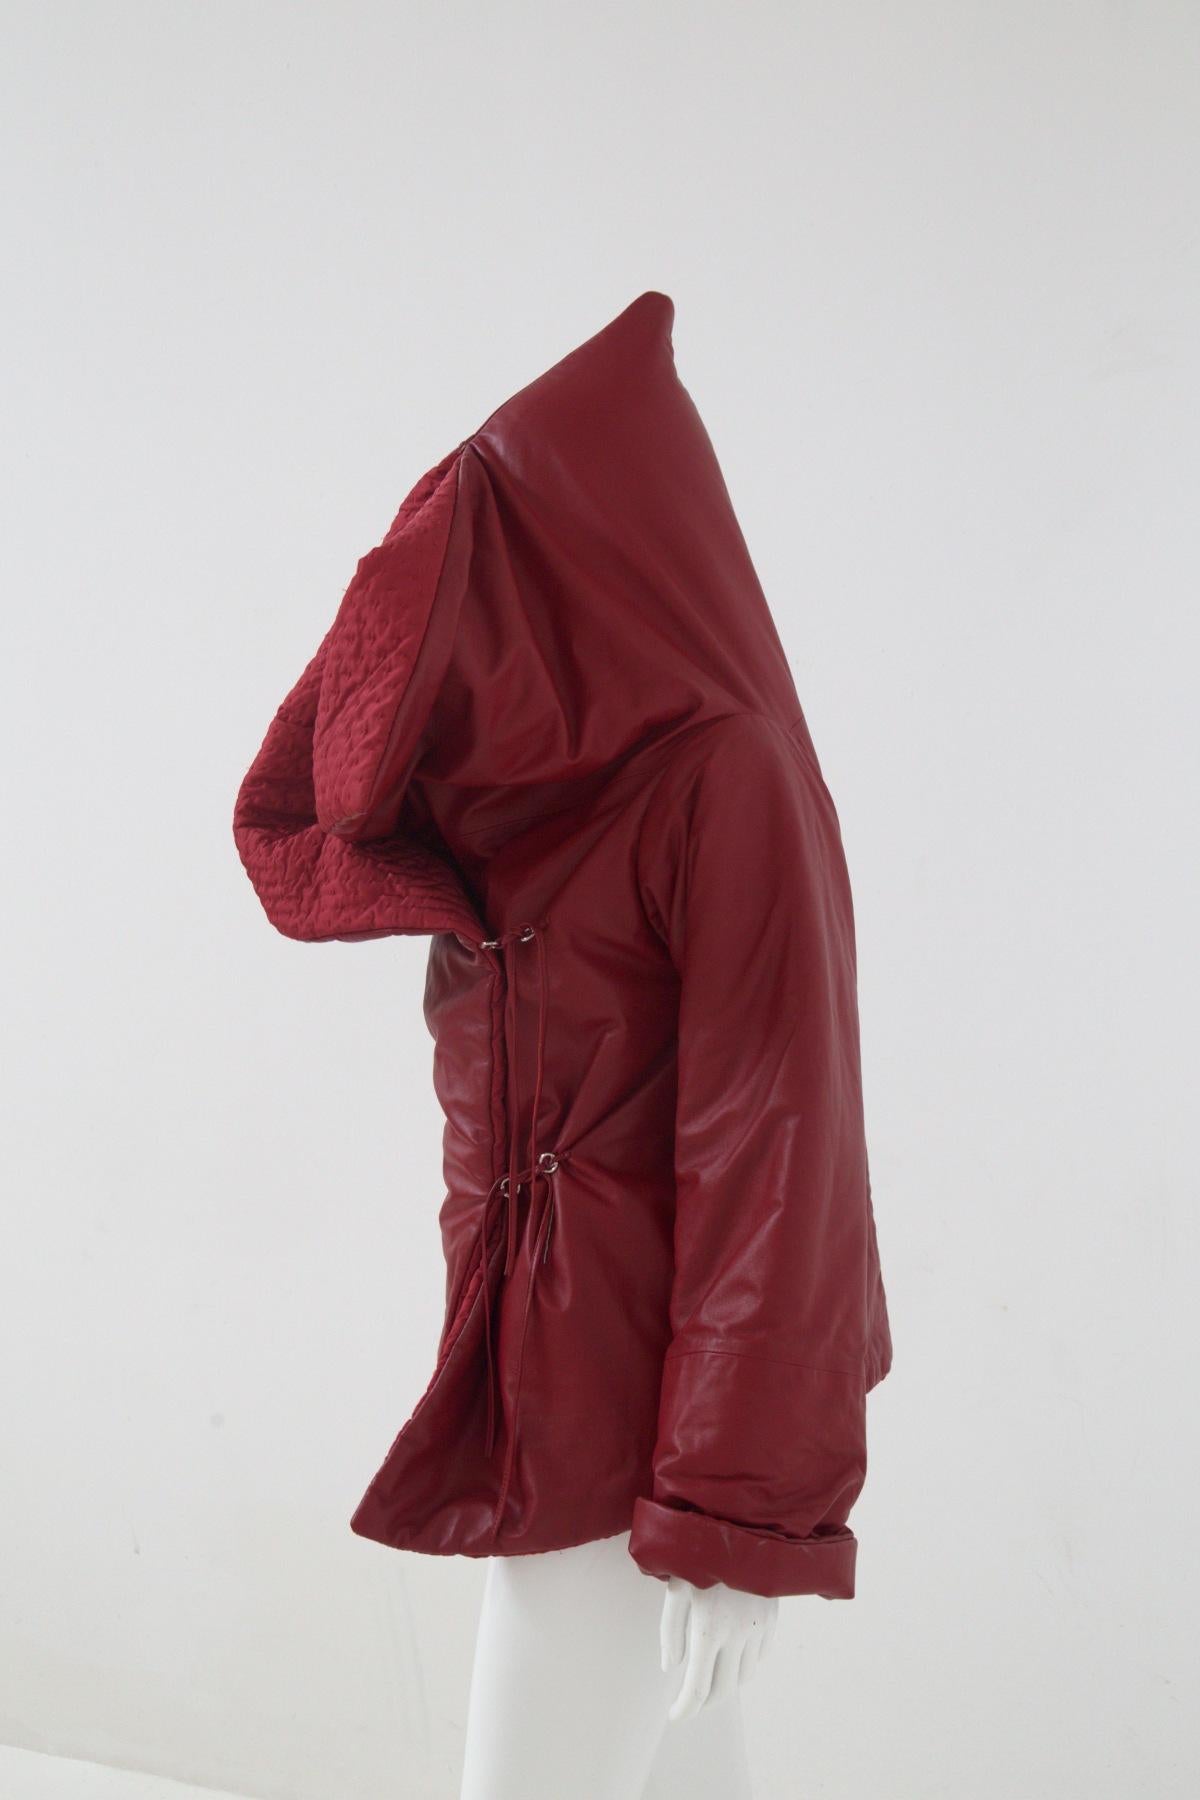 Gianfranco Ferré Rare Oversized Red Leather Jacket For Sale 2